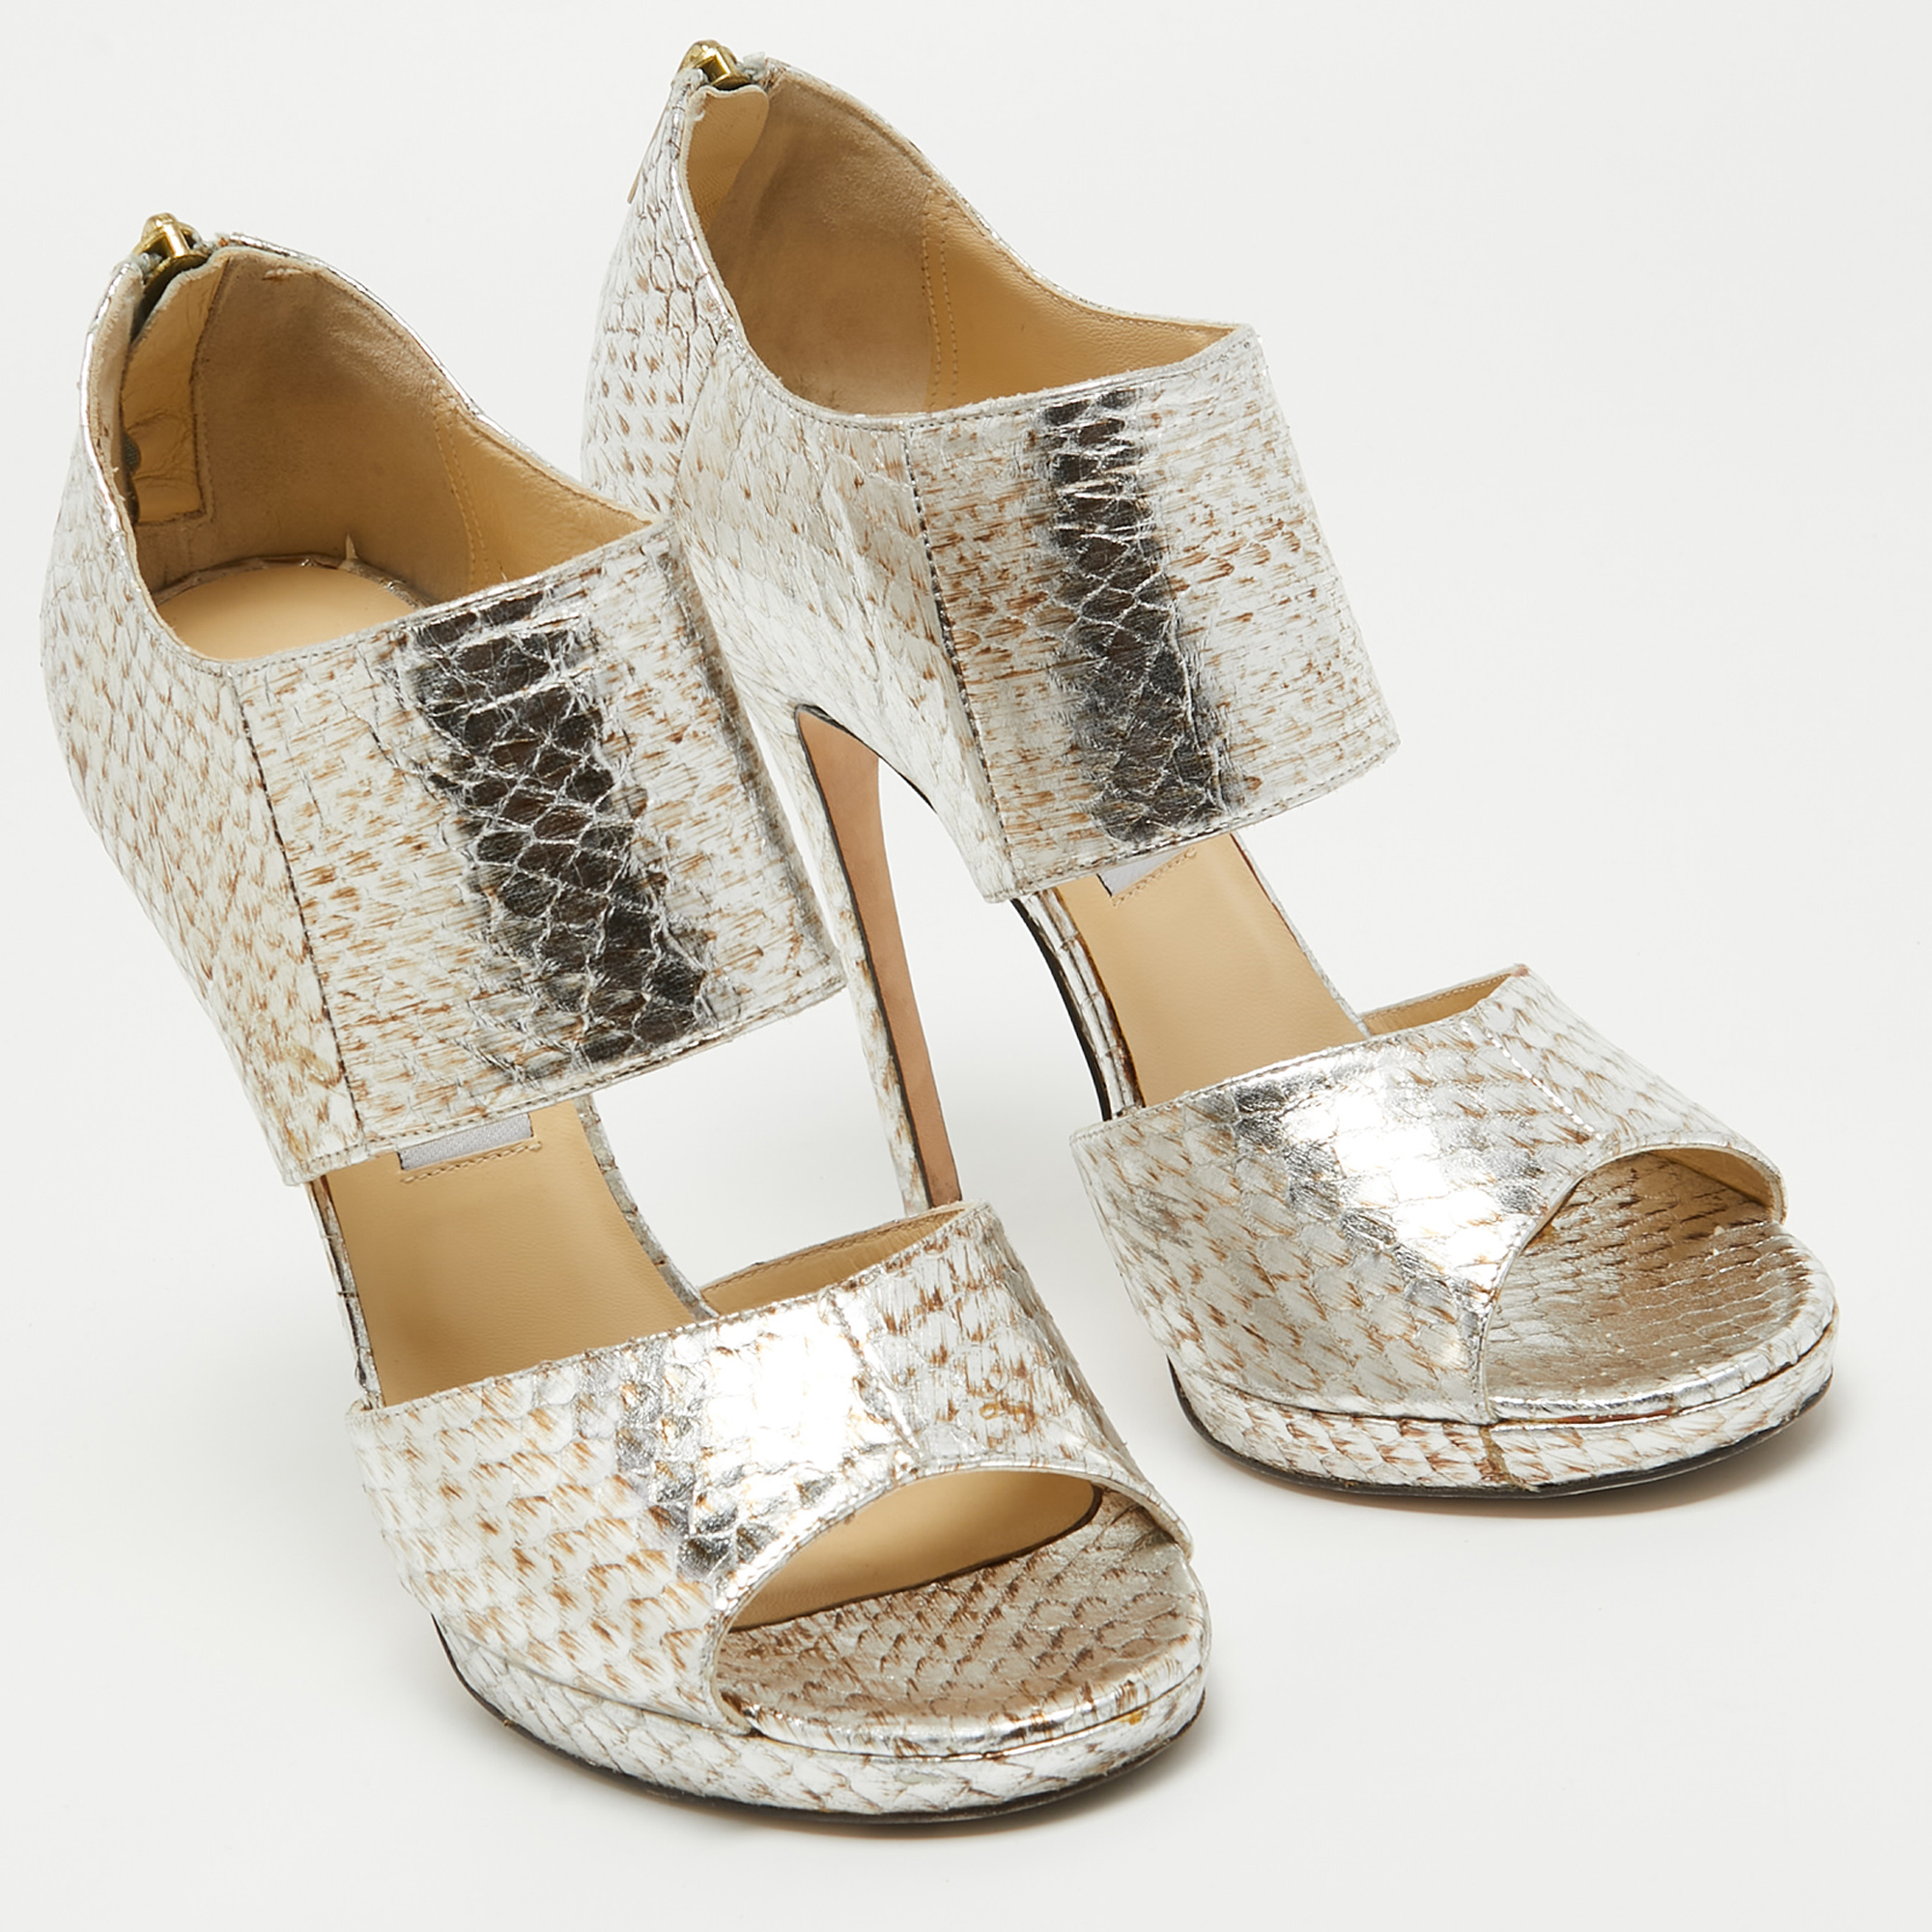 Jimmy Choo Silver/Brown Python Embossed Leather Private Sandals Size 38.5